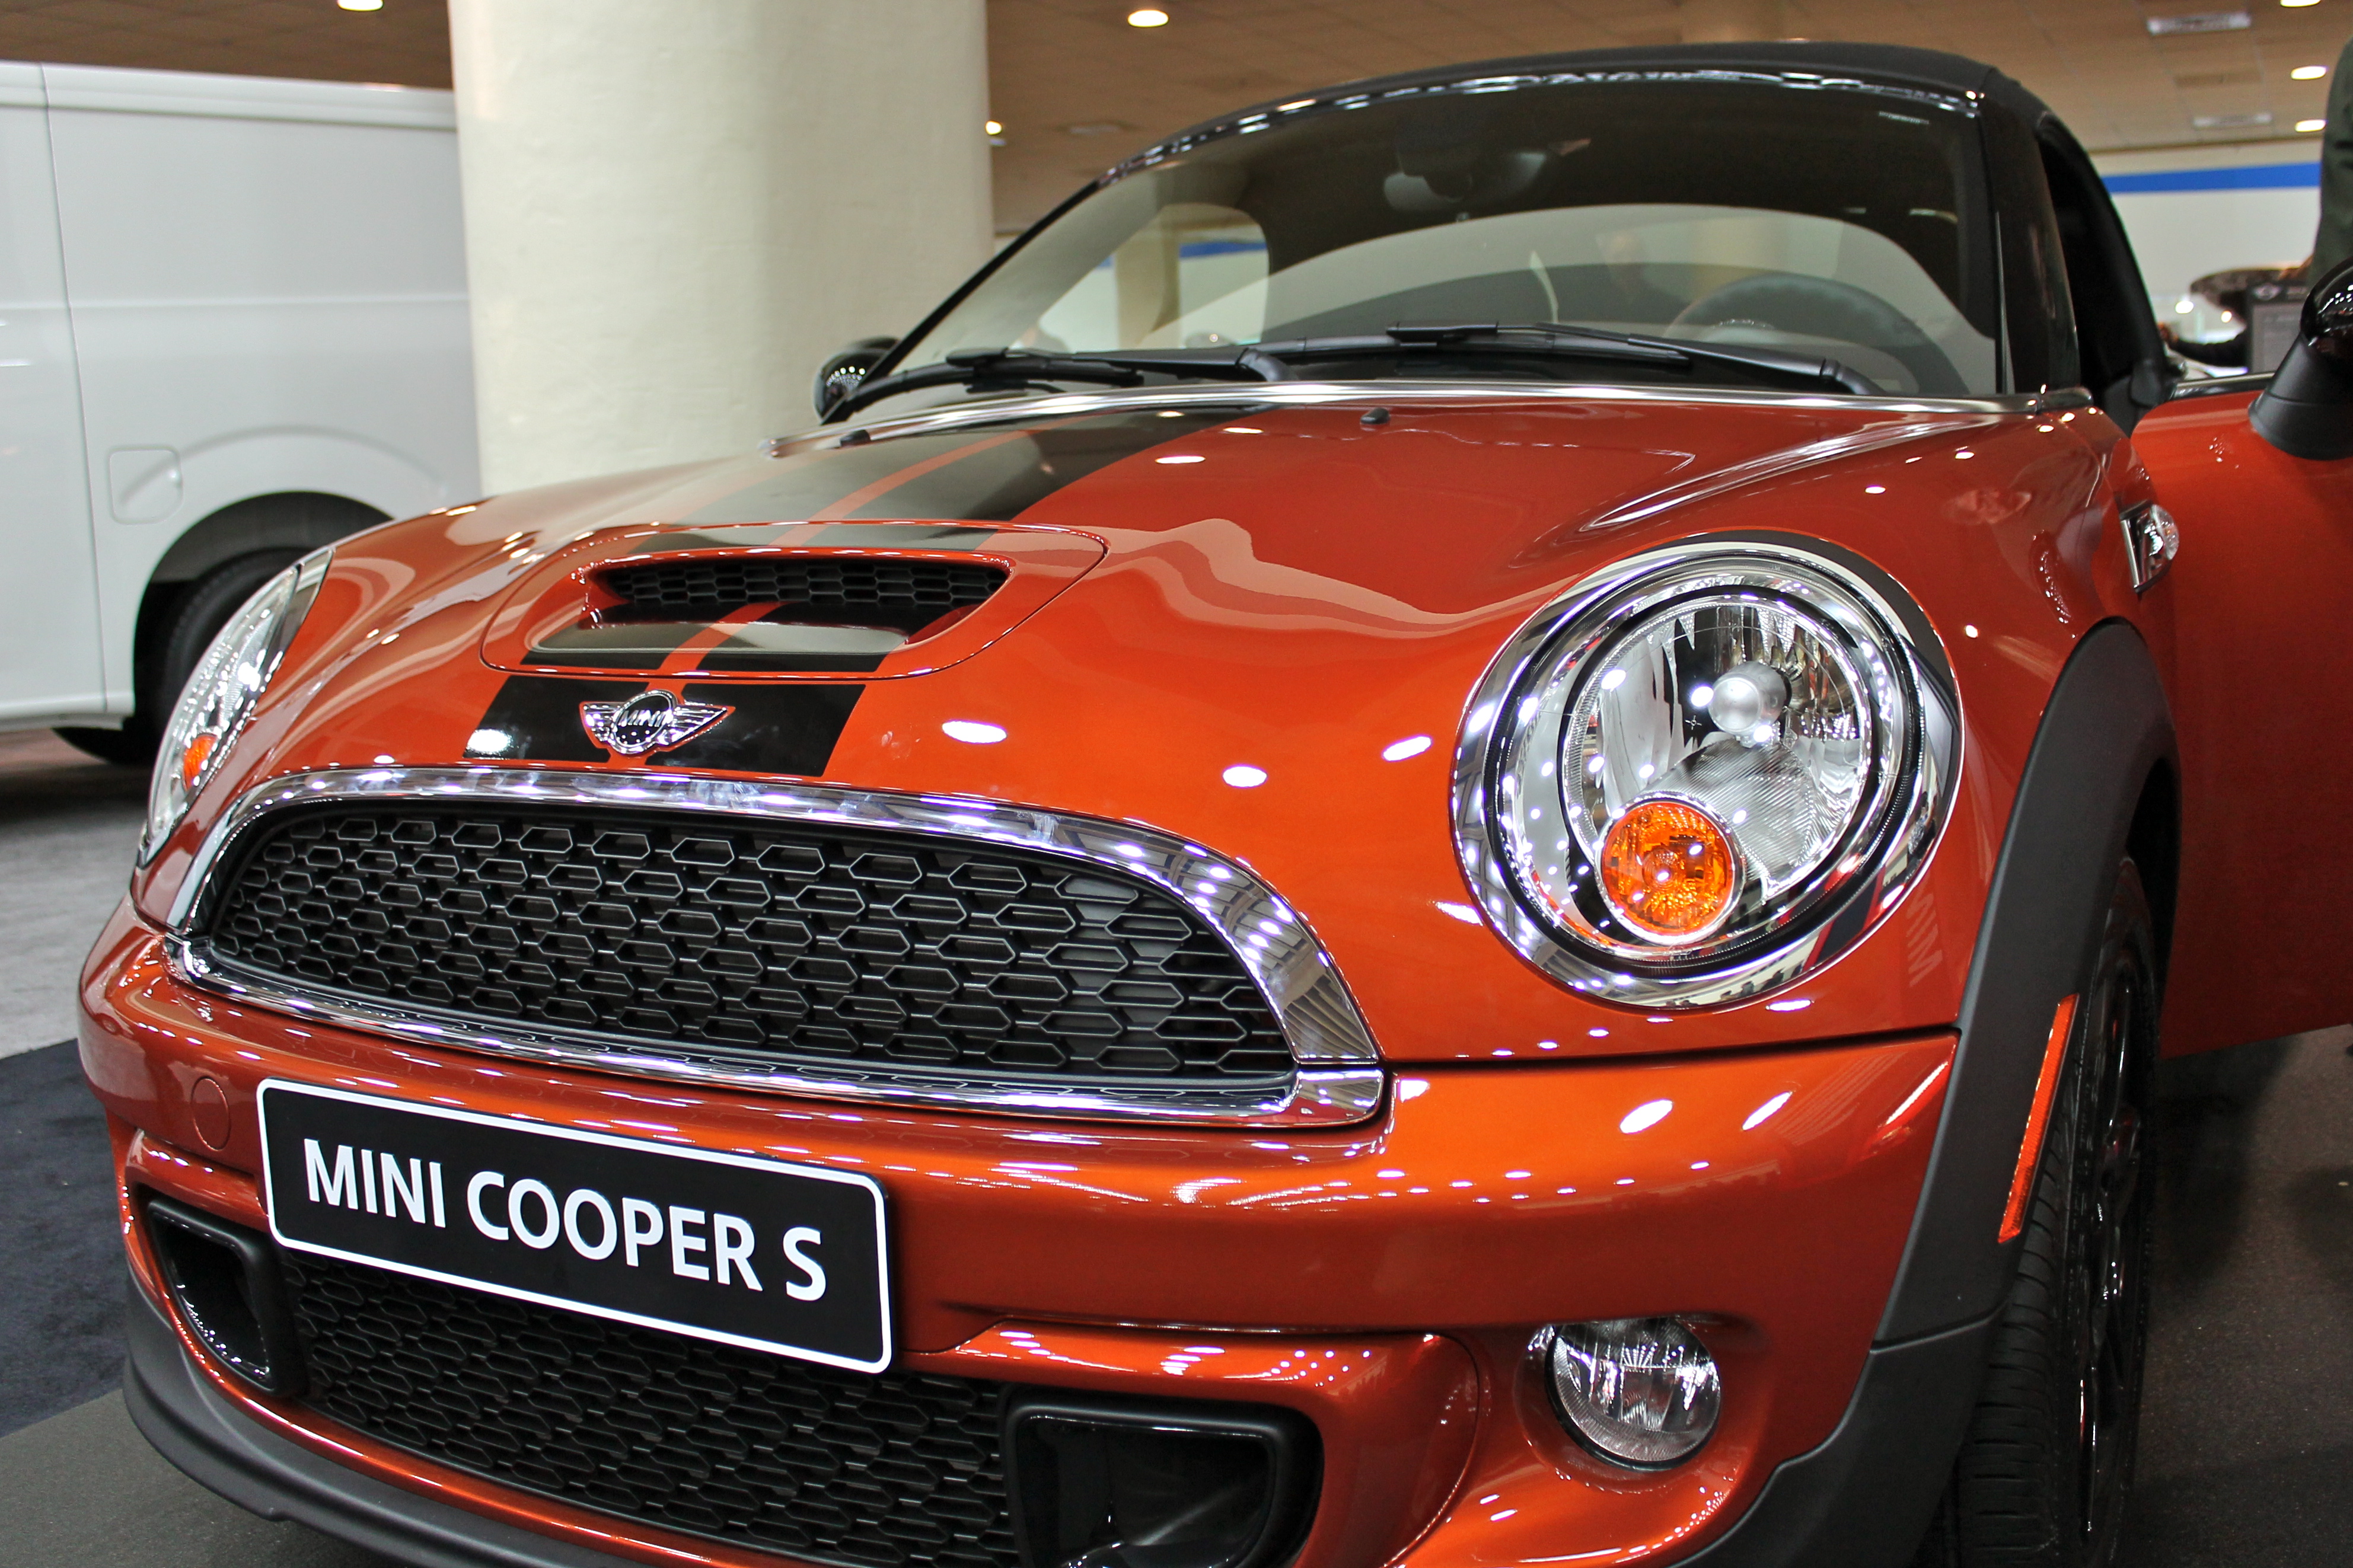 MINI Cooper Coupe | Flickr - Photo Sharing!